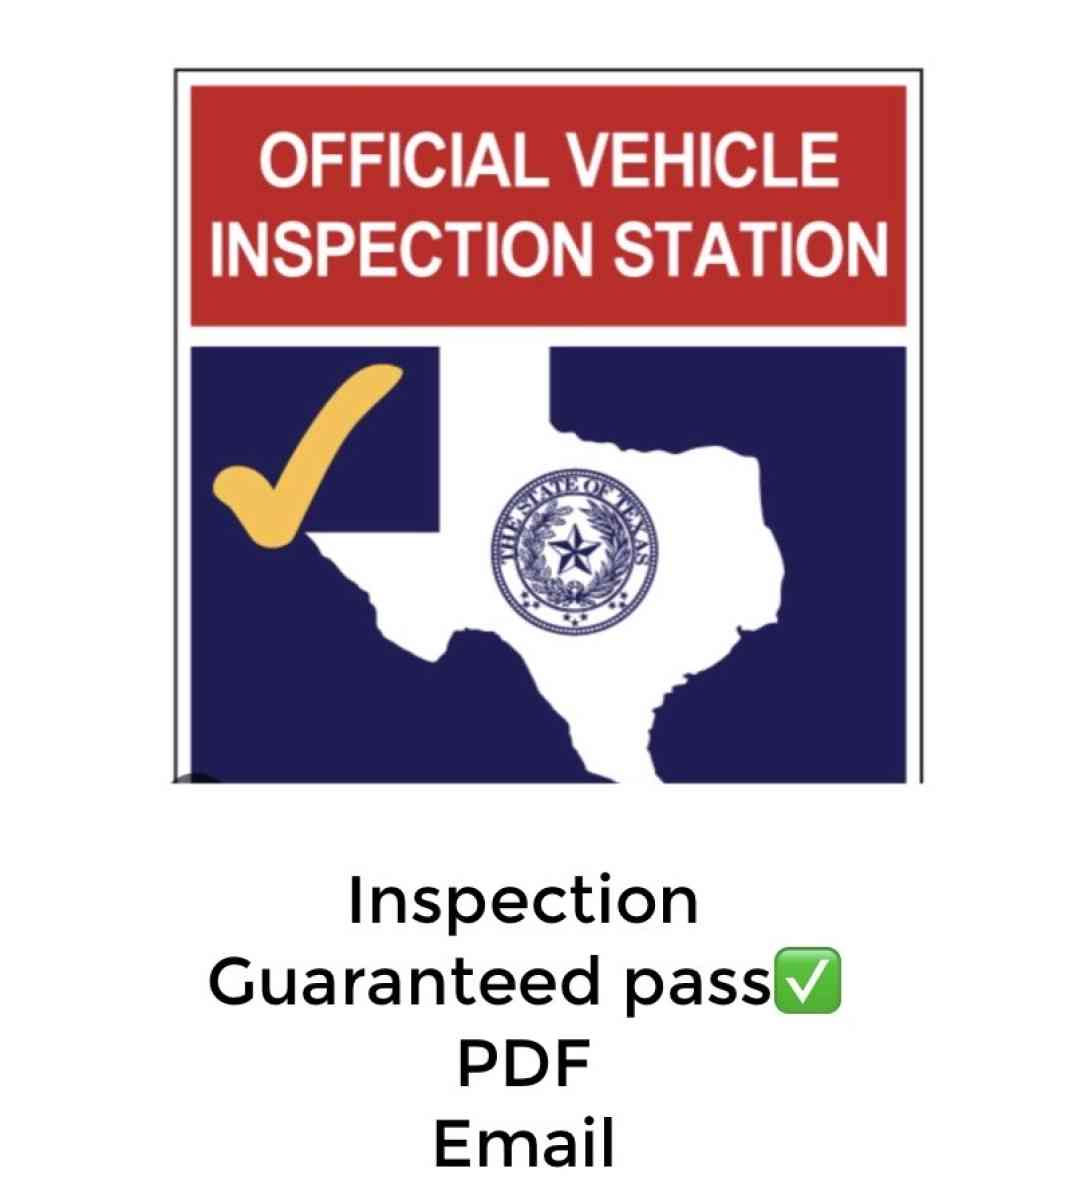 Vehicle inspections